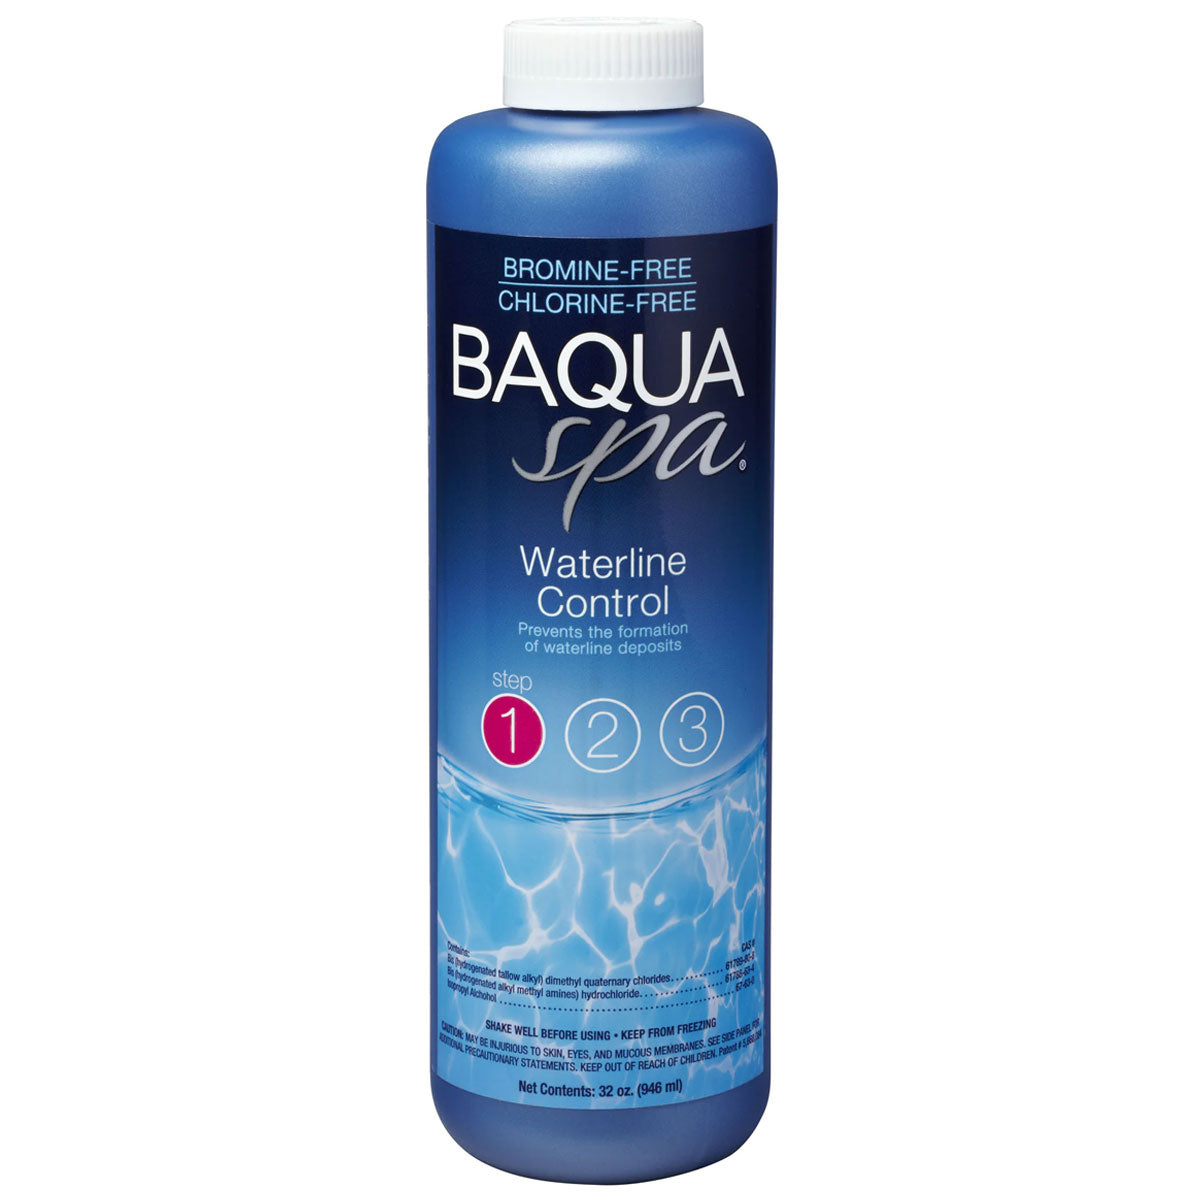  BAQUA Spa® Waterline Control for hot tubs and spas